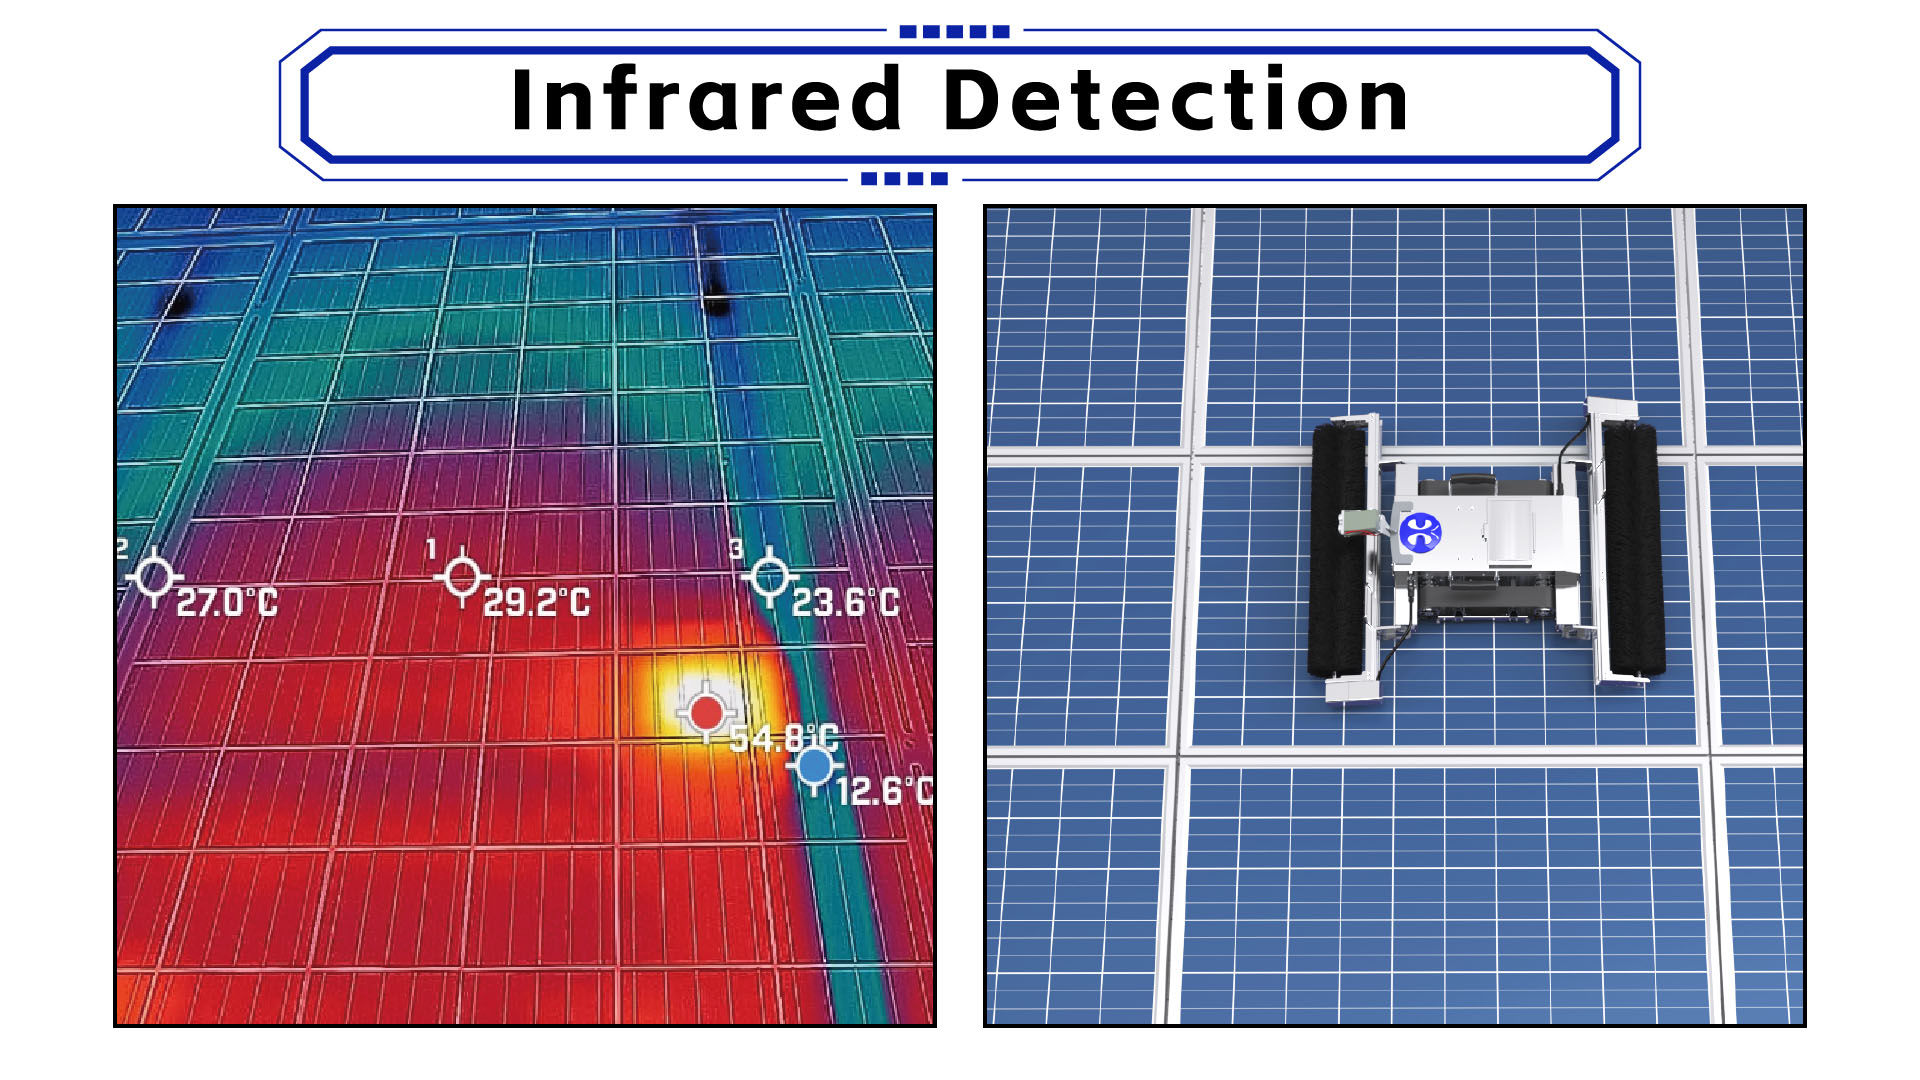 Kwun Extended Function - Infrared Detection